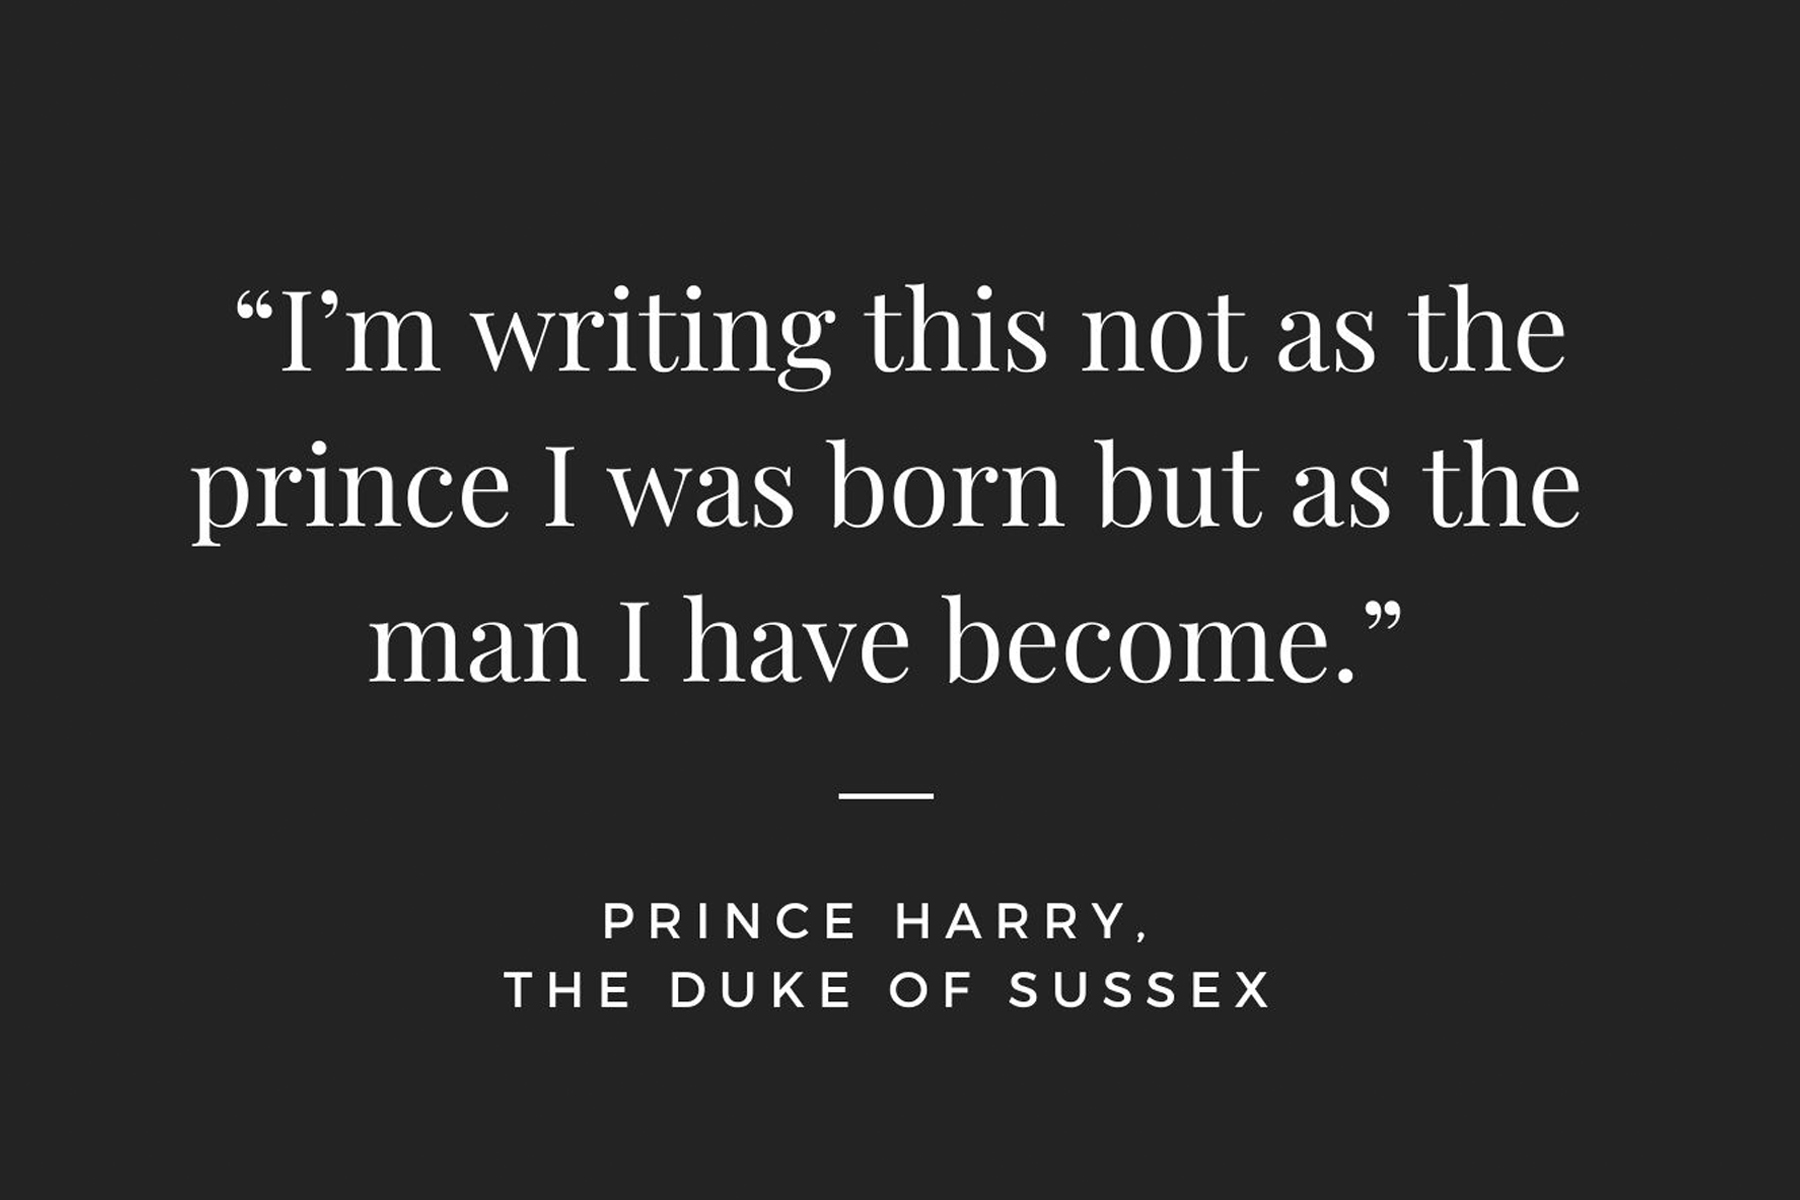 Image with the text 'I'm writin this not as the prince I was born but as the man I have become.' Prince Harry, The Duke of Sussex